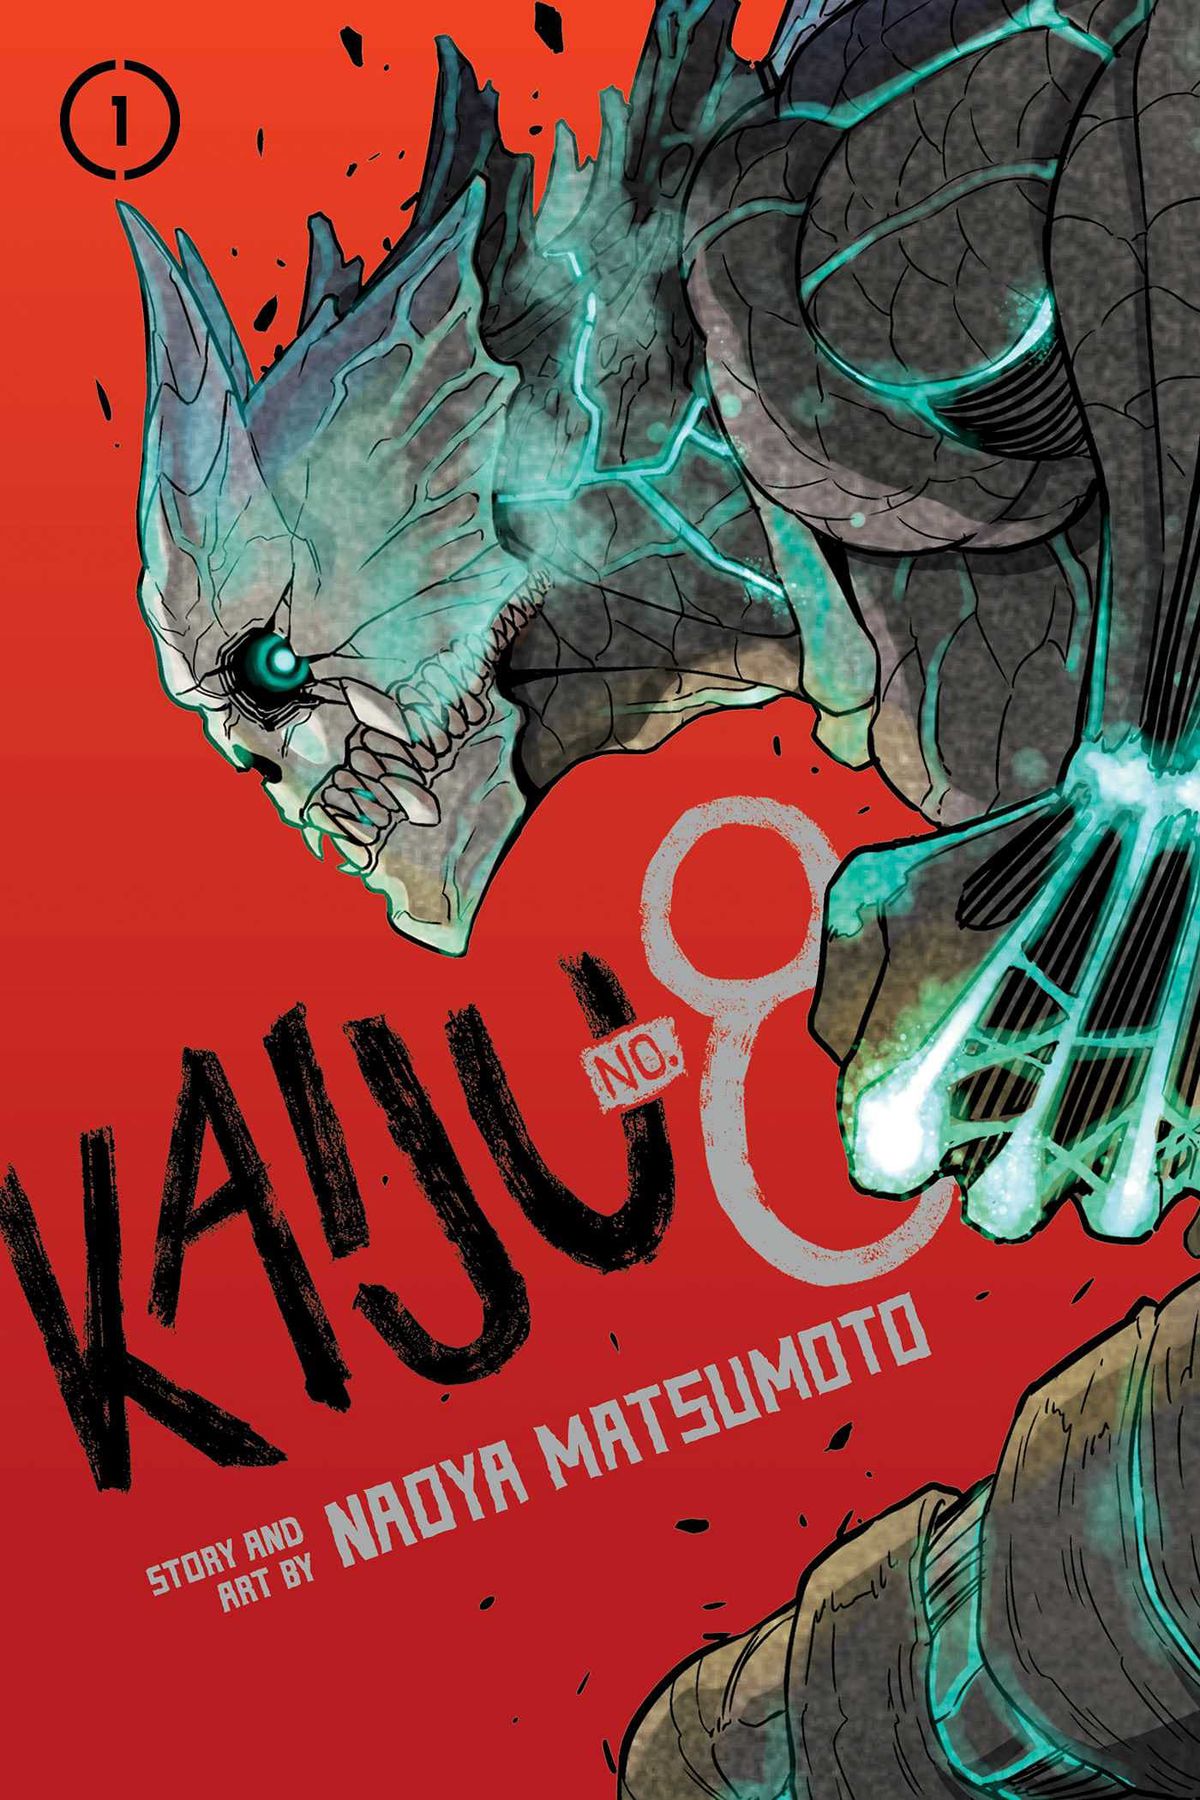 A vaguely humanoid kaiju monster, veins and bones glowing blue-white through its grey carapace, on the cover of Kaiju No. 8. 